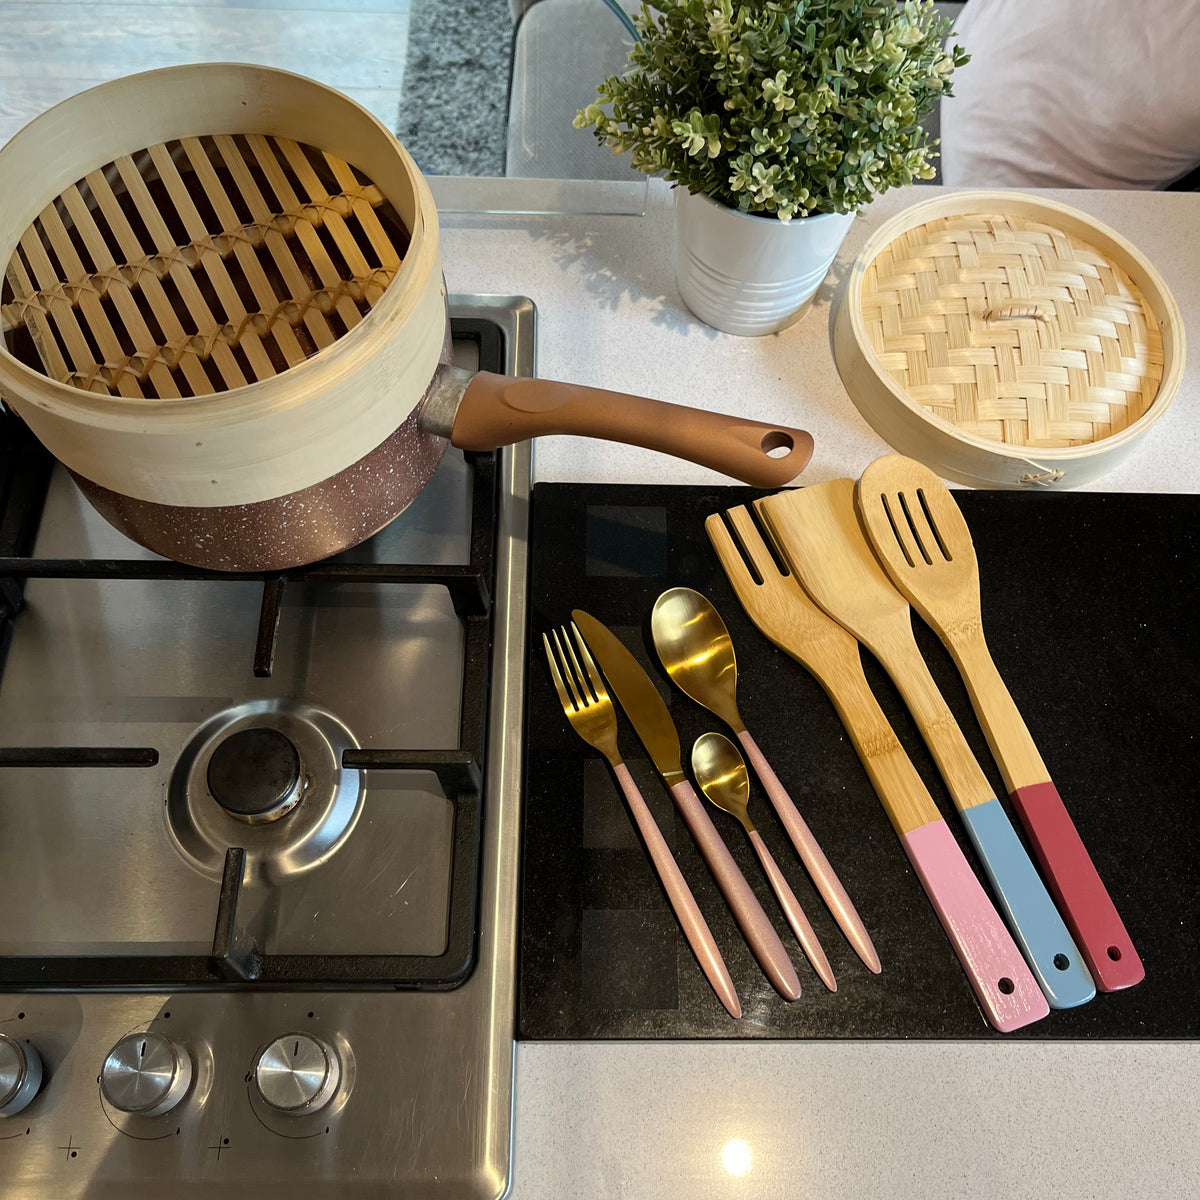 Two-Tier Bamboo Steamer on hob with utensils and cutlery